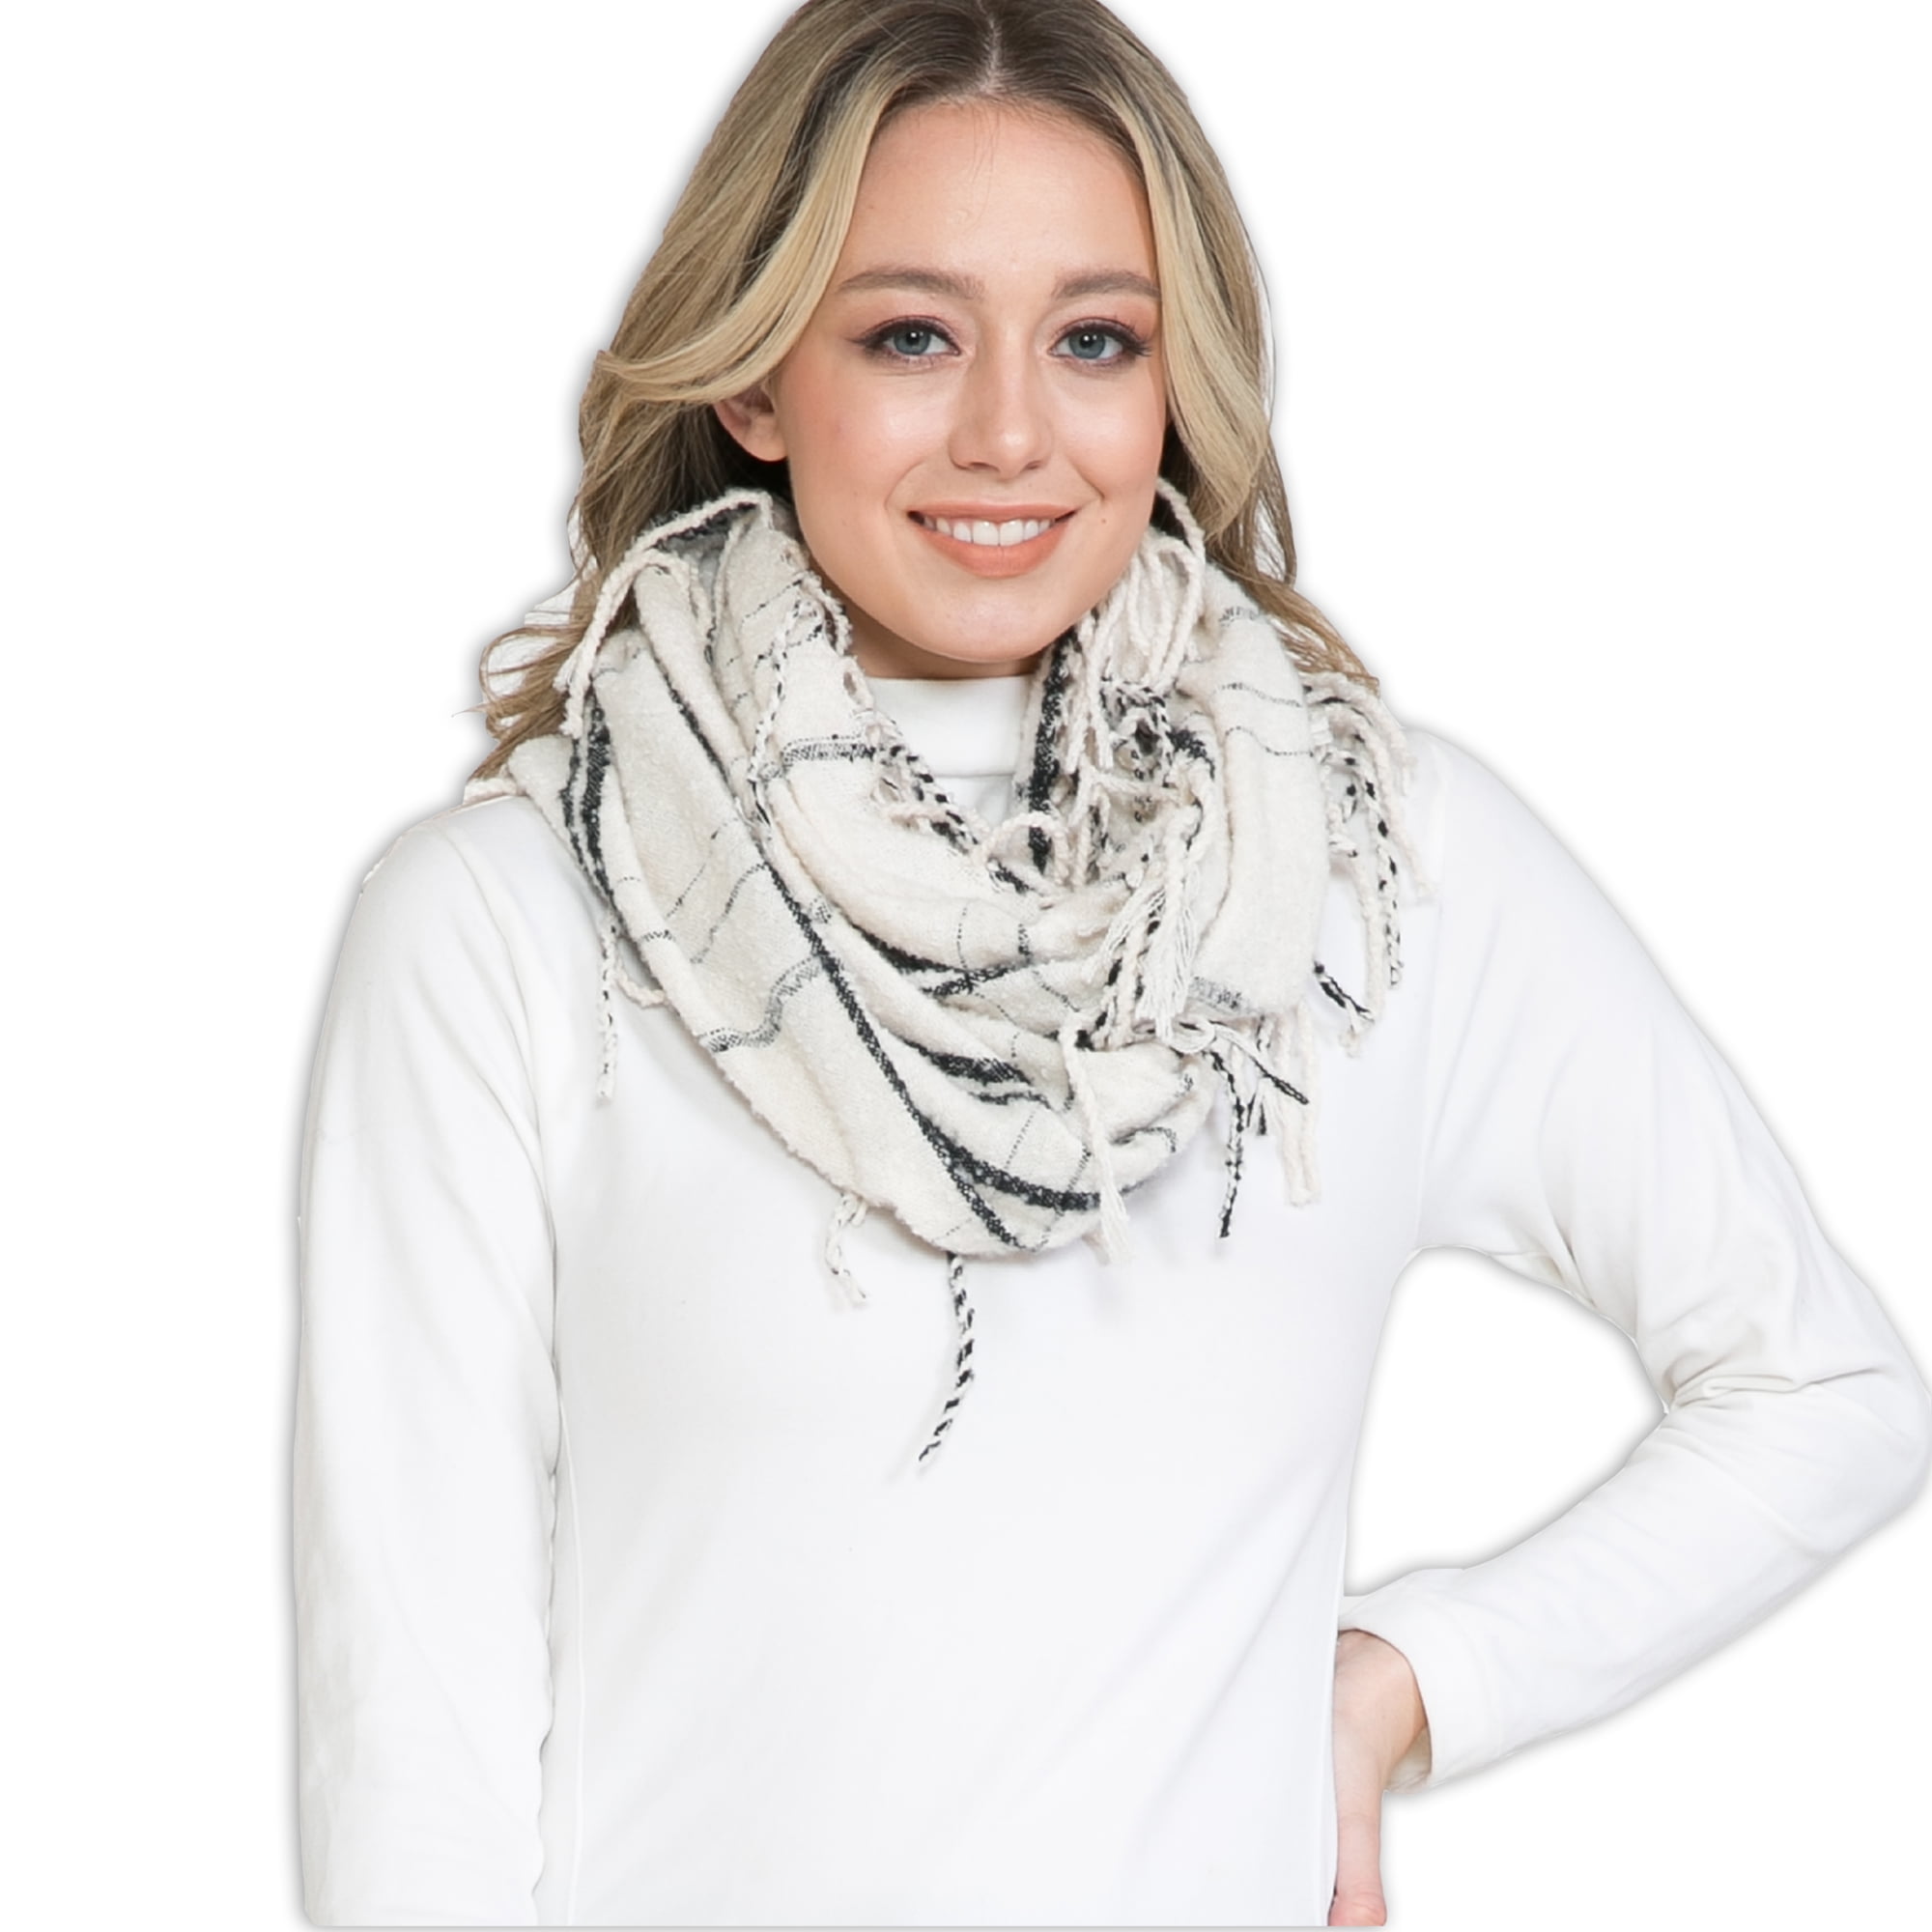 Travel Loop Scarfs Scarves for Women White Infinity Scarf with Hidden Zipper Pocket